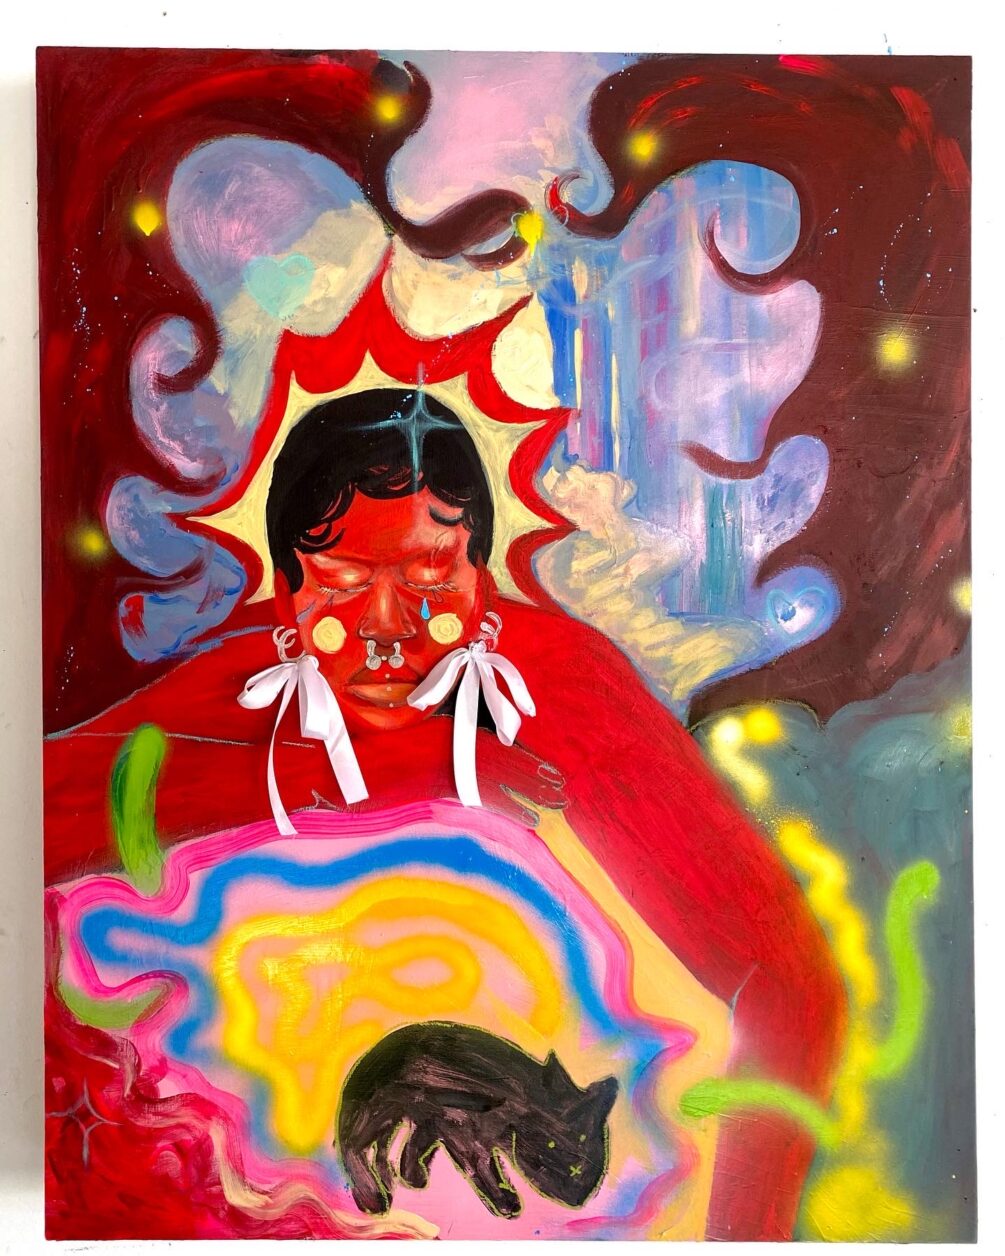 An abstract painting by Zenaib Diamande of a person with red skin with flame-like and smoke-like designs behind them, holding a small black cat.